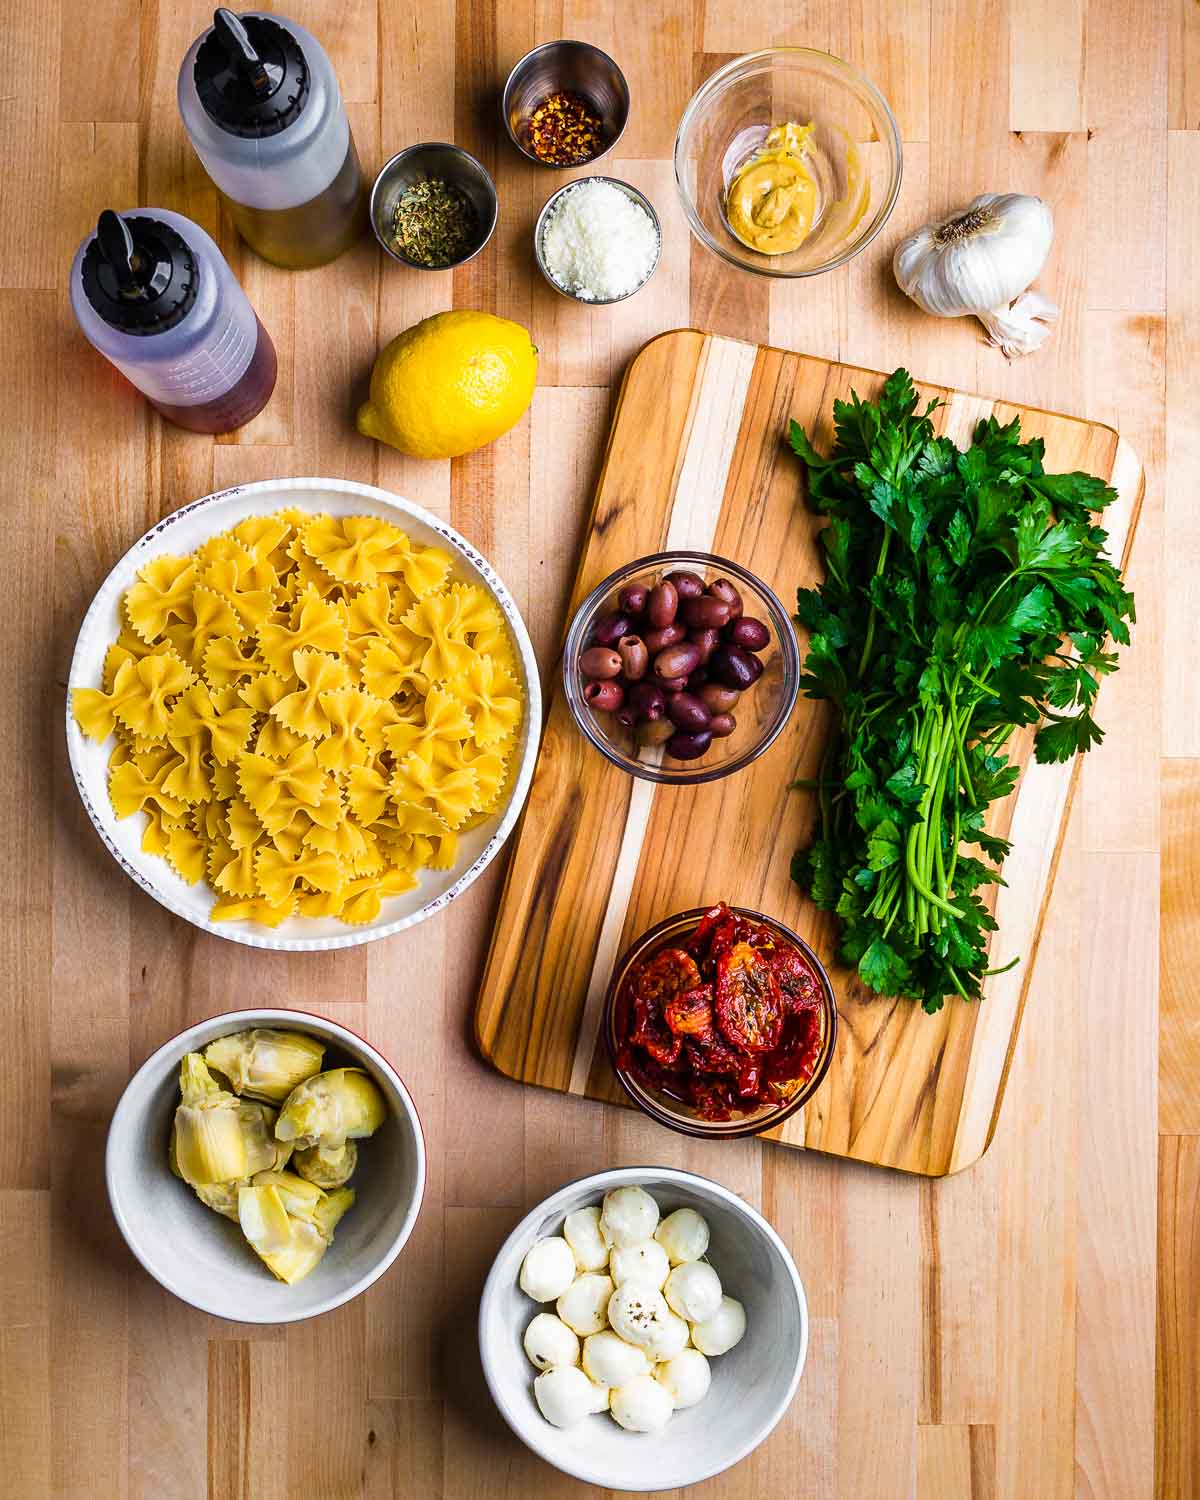 Ingredients shown: oil, vinegar, lemons, cheese, mustard, garlic, bow tie pasta, olives, sun dried tomatoes, artichoke hearts, and parsley.